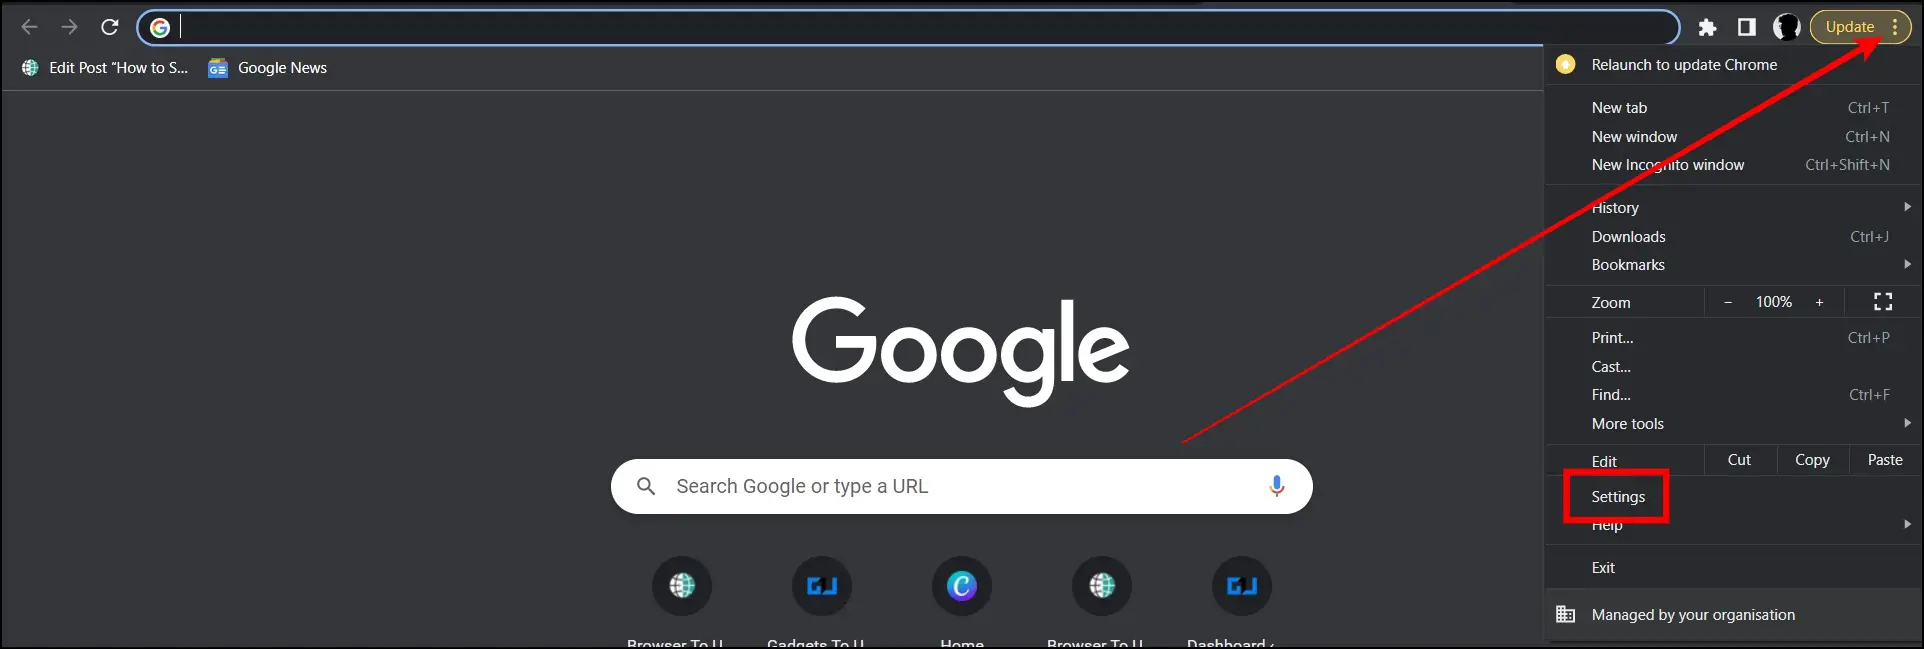 Disable Autocomplete searches on Chrome on PC to Delete Recent Google Search History Suggestions 